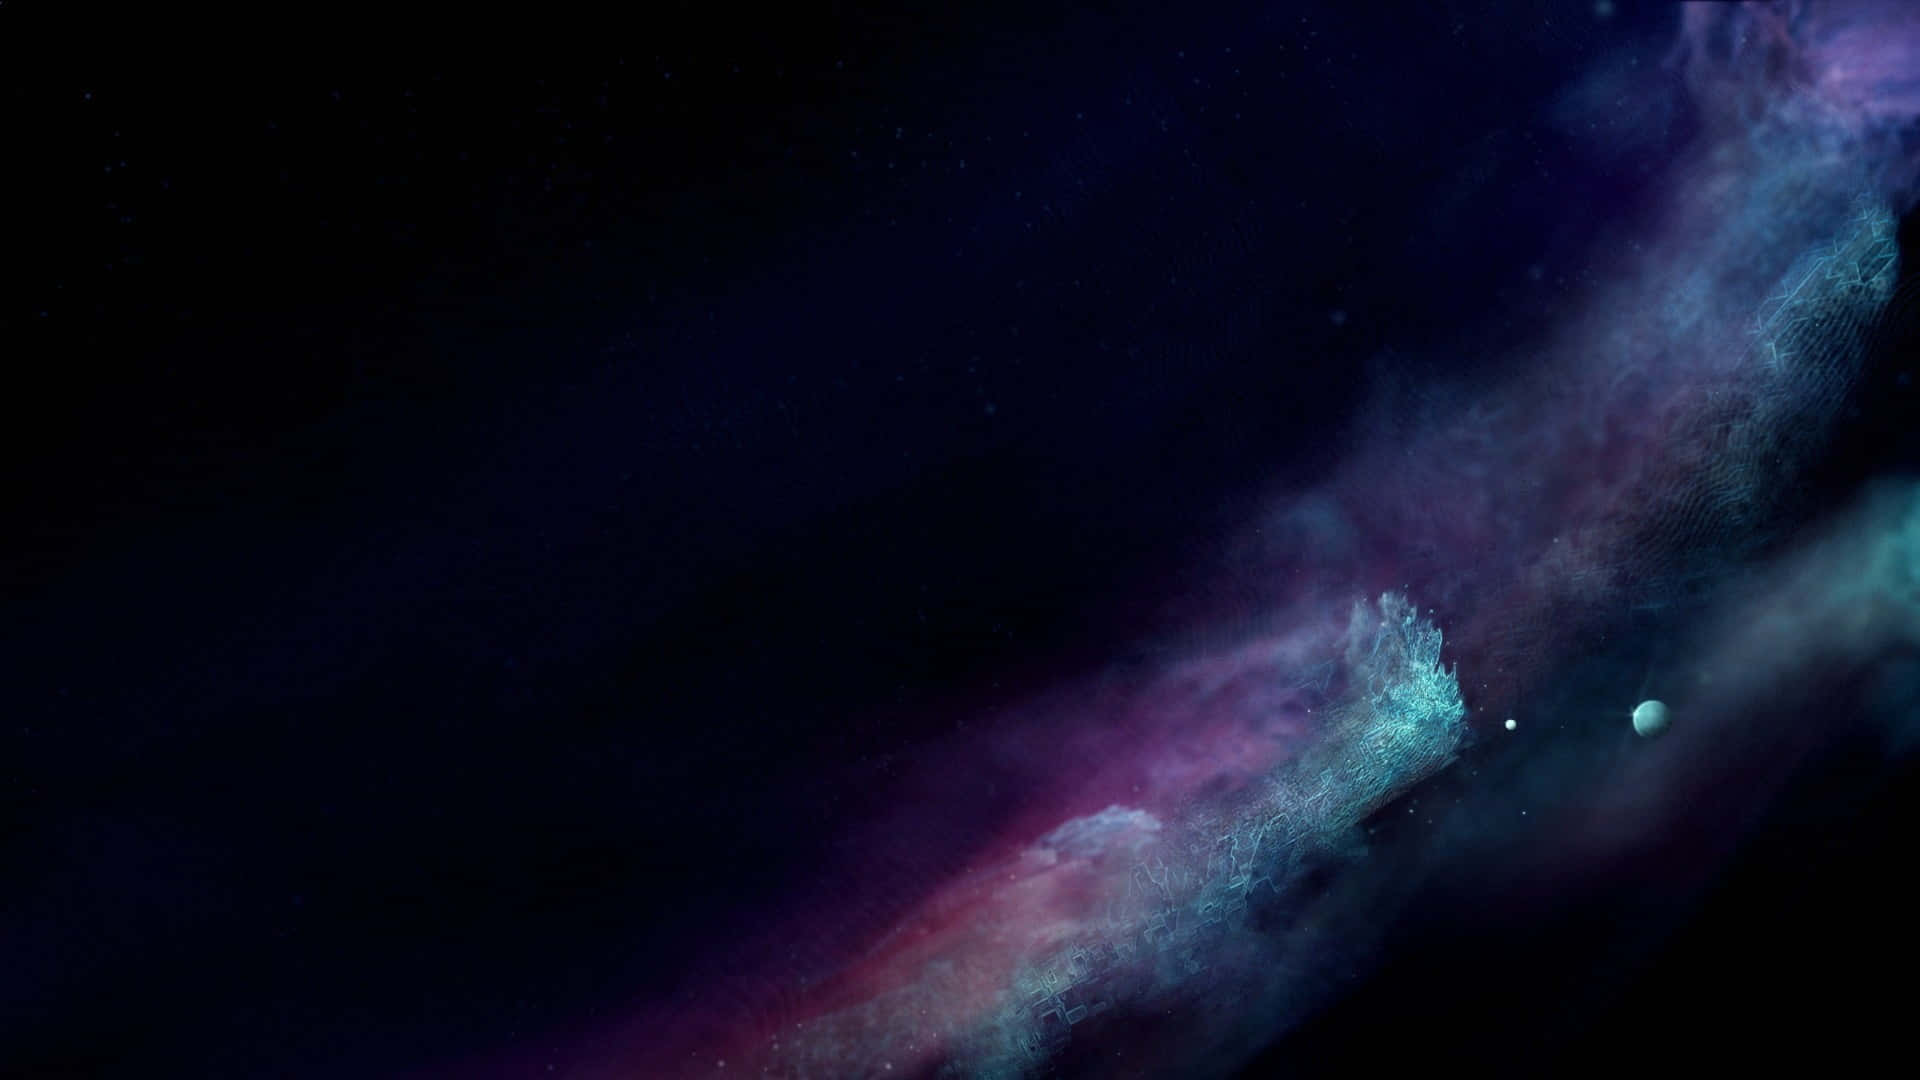 A pulsating cosmic swirl of deep violet and onyx hues, captured from the depths of the Universe. Wallpaper